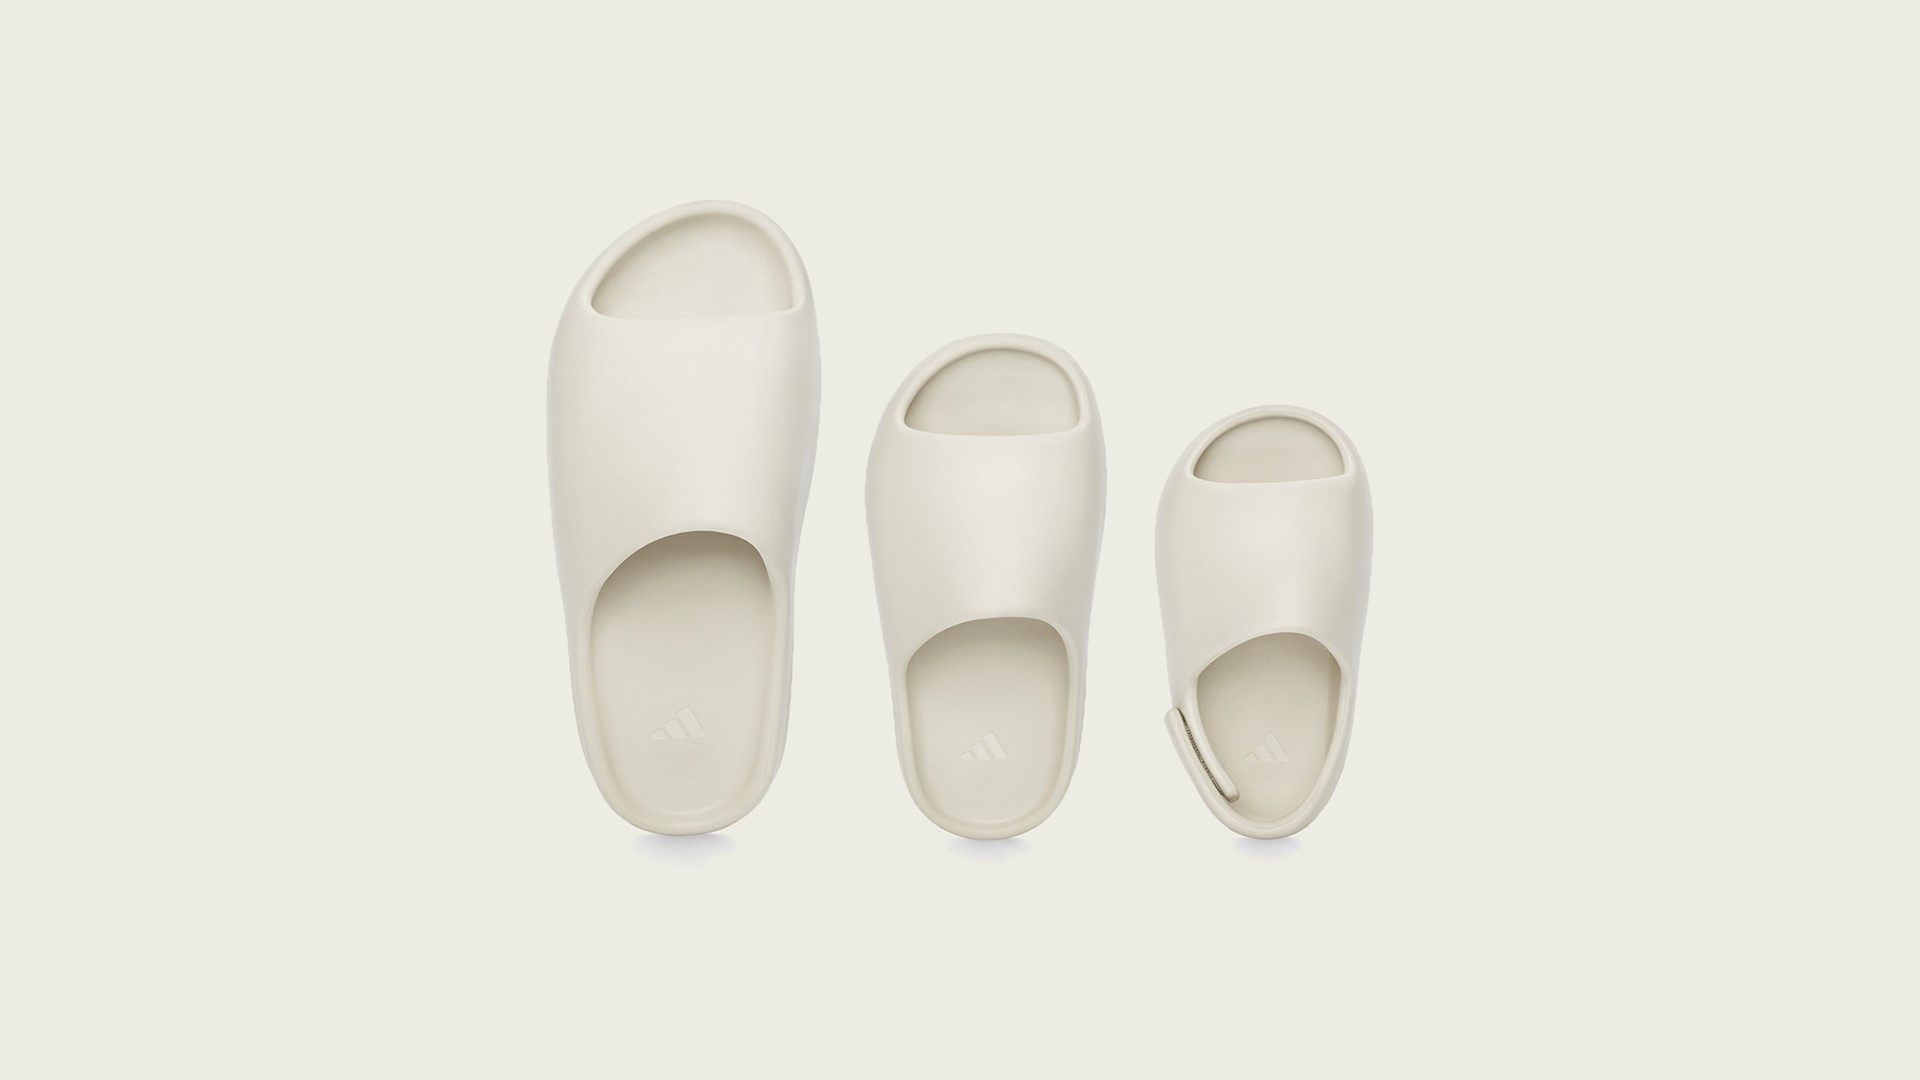 adidas + KANYE WEST announce the YEEZY SLIDE Desert Sand, the YEEZY SLIDE  Bone, and the YEEZY SLIDE Resin